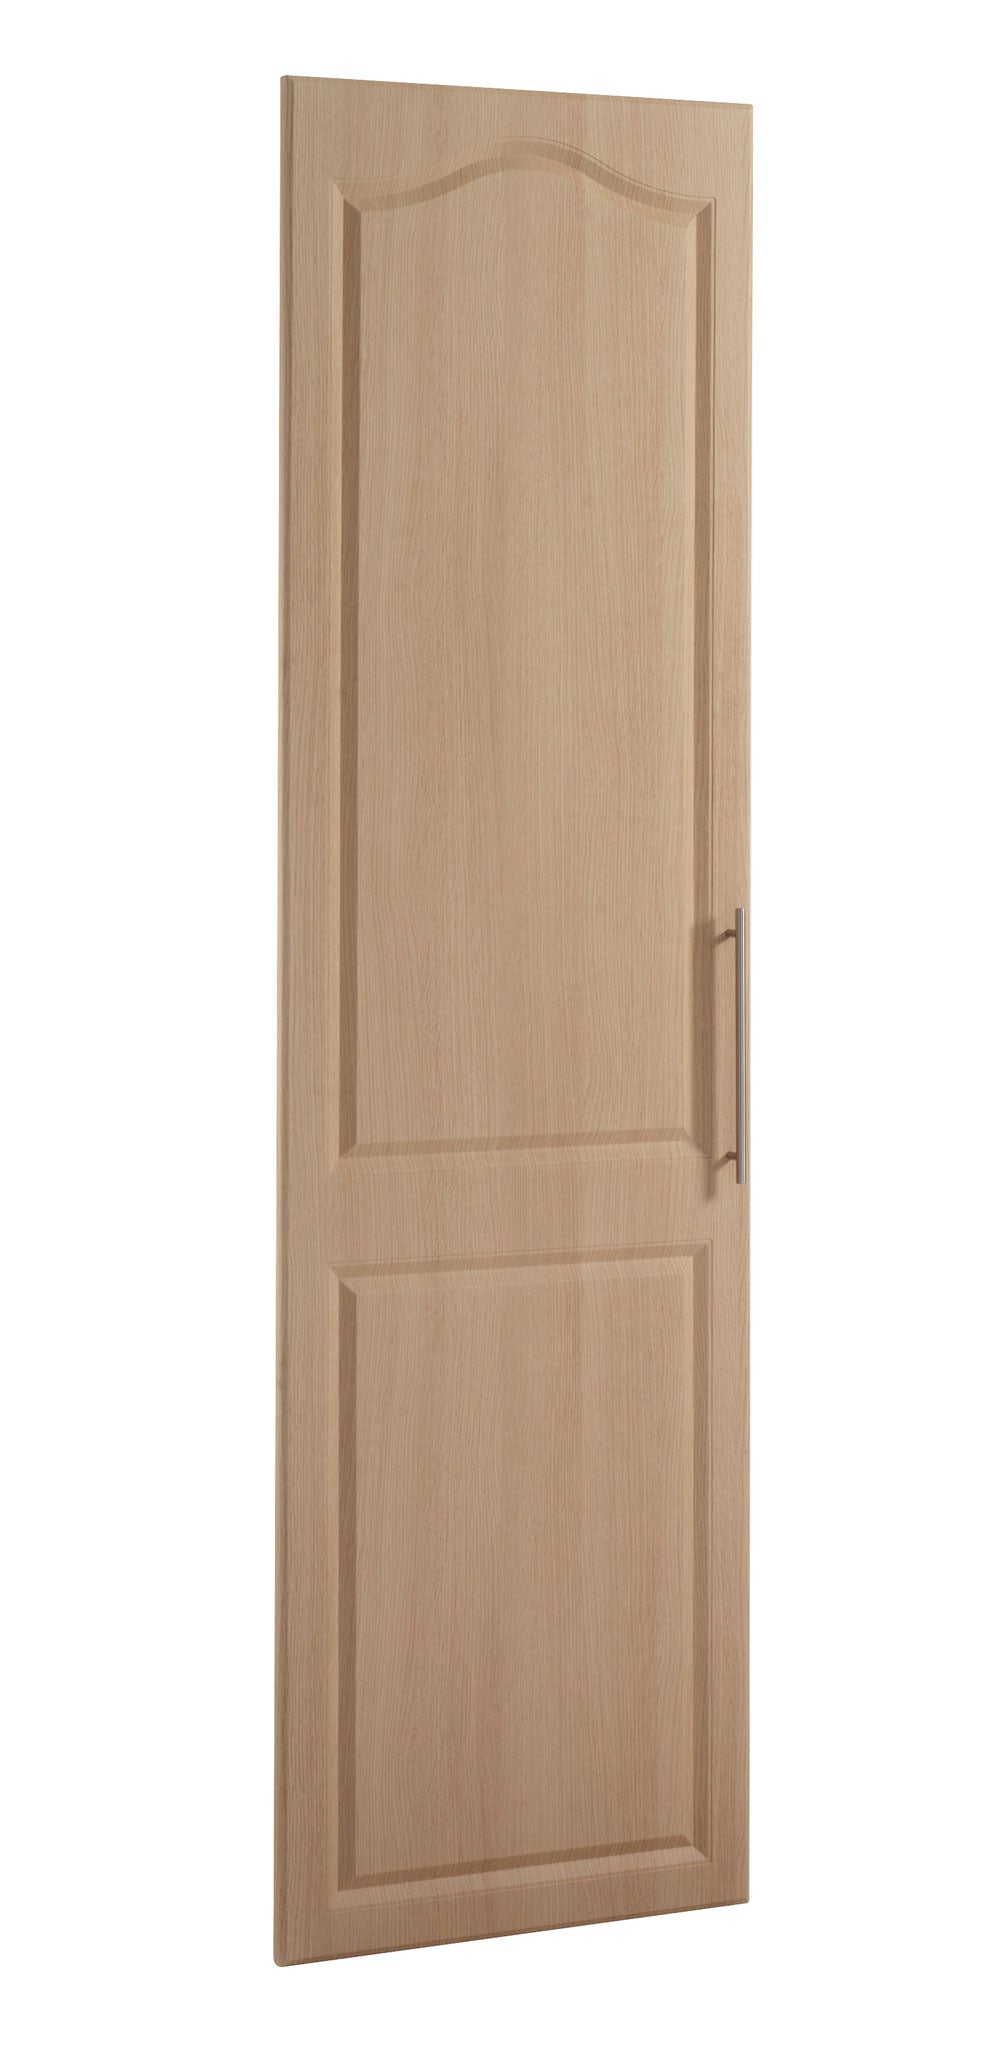 Made to measure New Sudbury kitchen door in any colour